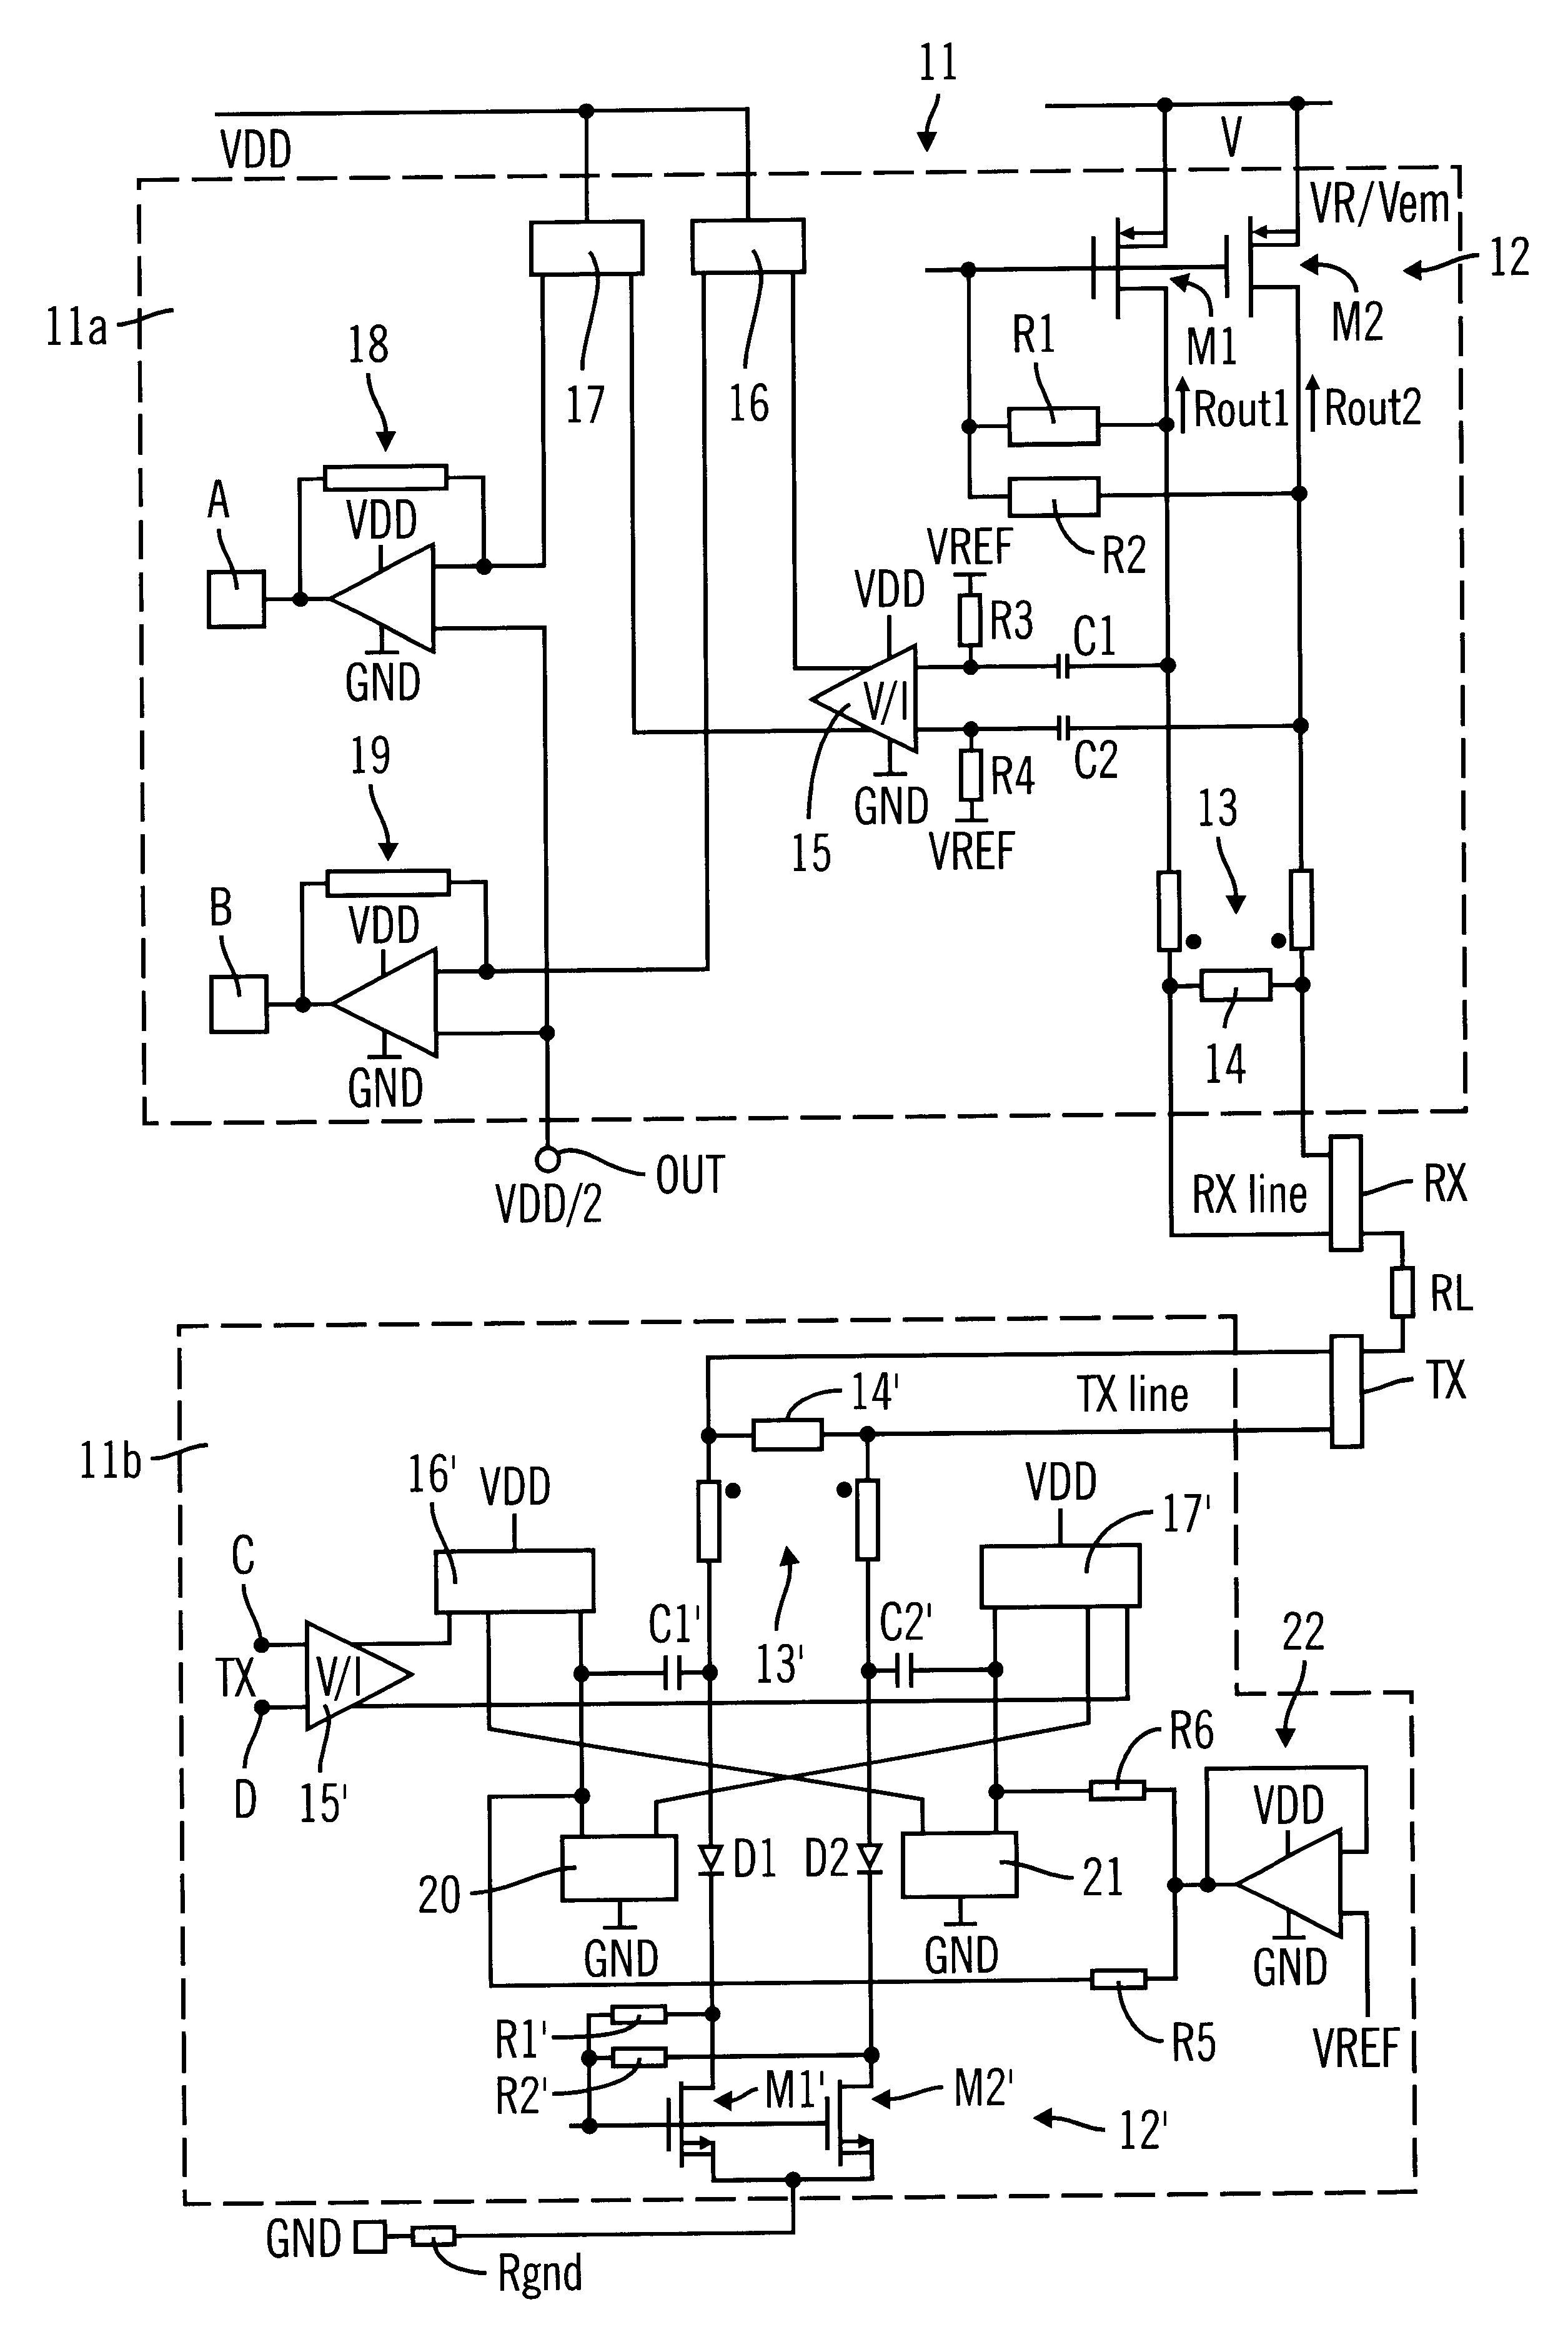 MOS transistors substitute circuit having a transformer/data interface function, particularly for ISDN networks and corresponding control and driving switch configuration